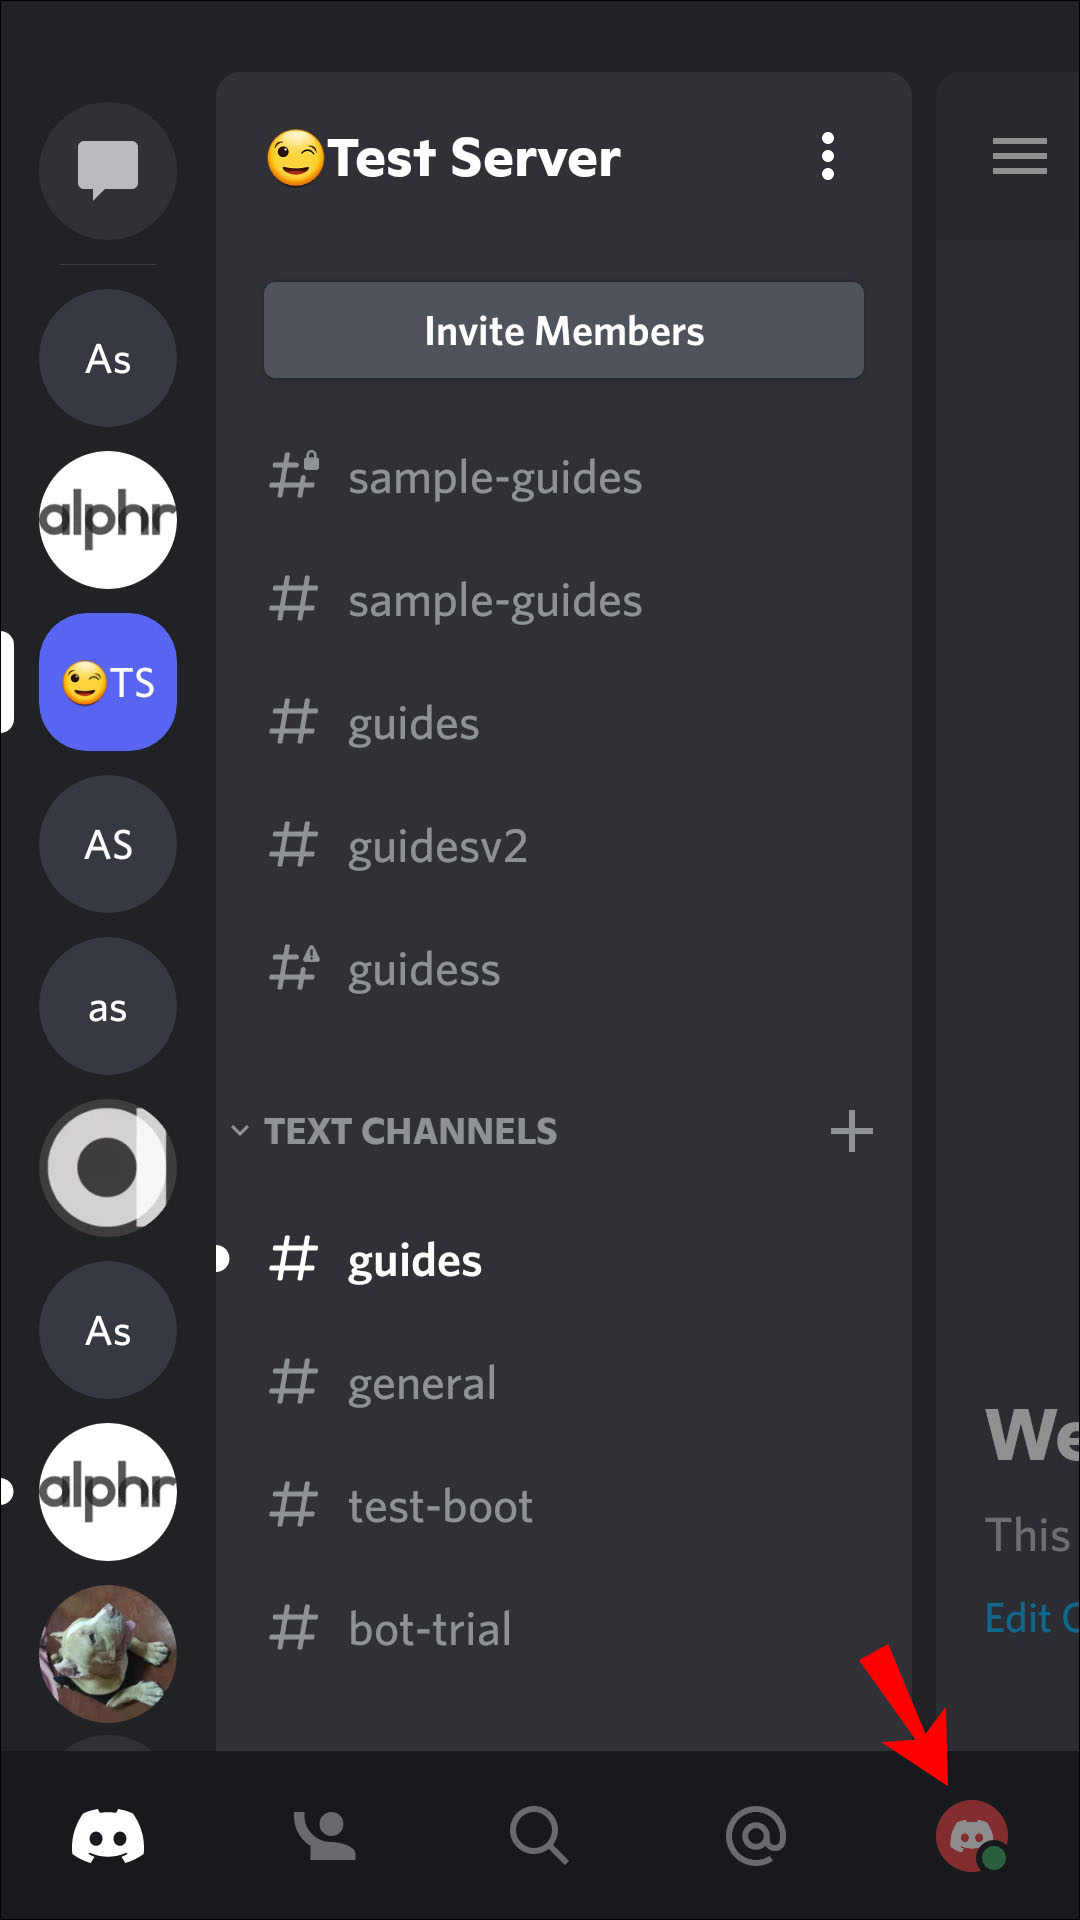 How to find your unique Discord ID, and what you can use it for